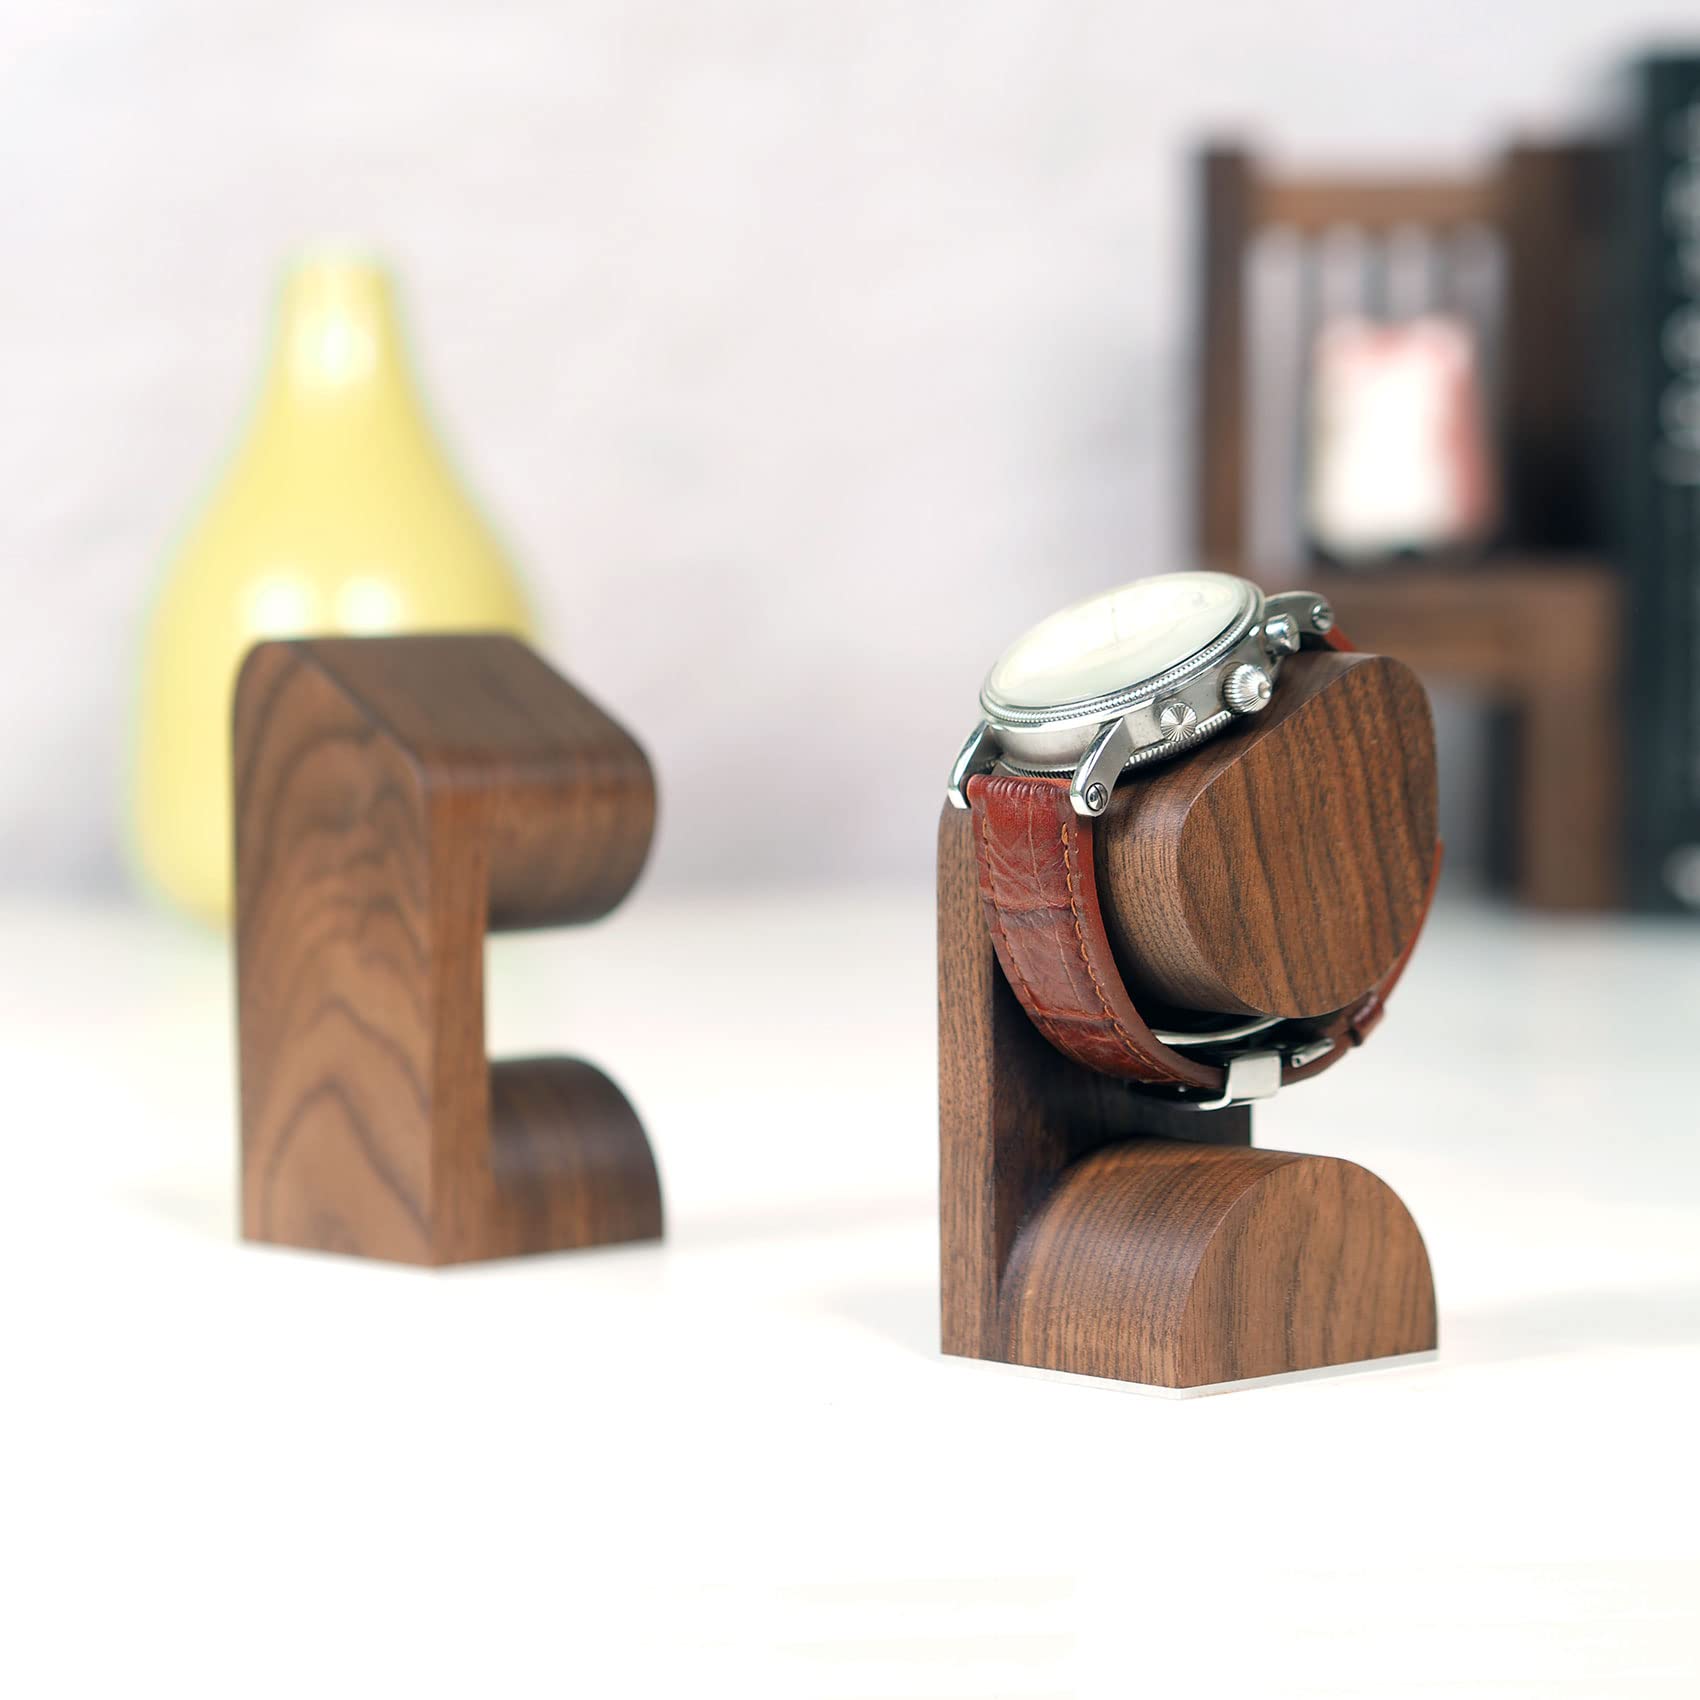 Watch Stand Handcrafted solid wood Watch Display Stand for both Men's and Women's Wrist Watches